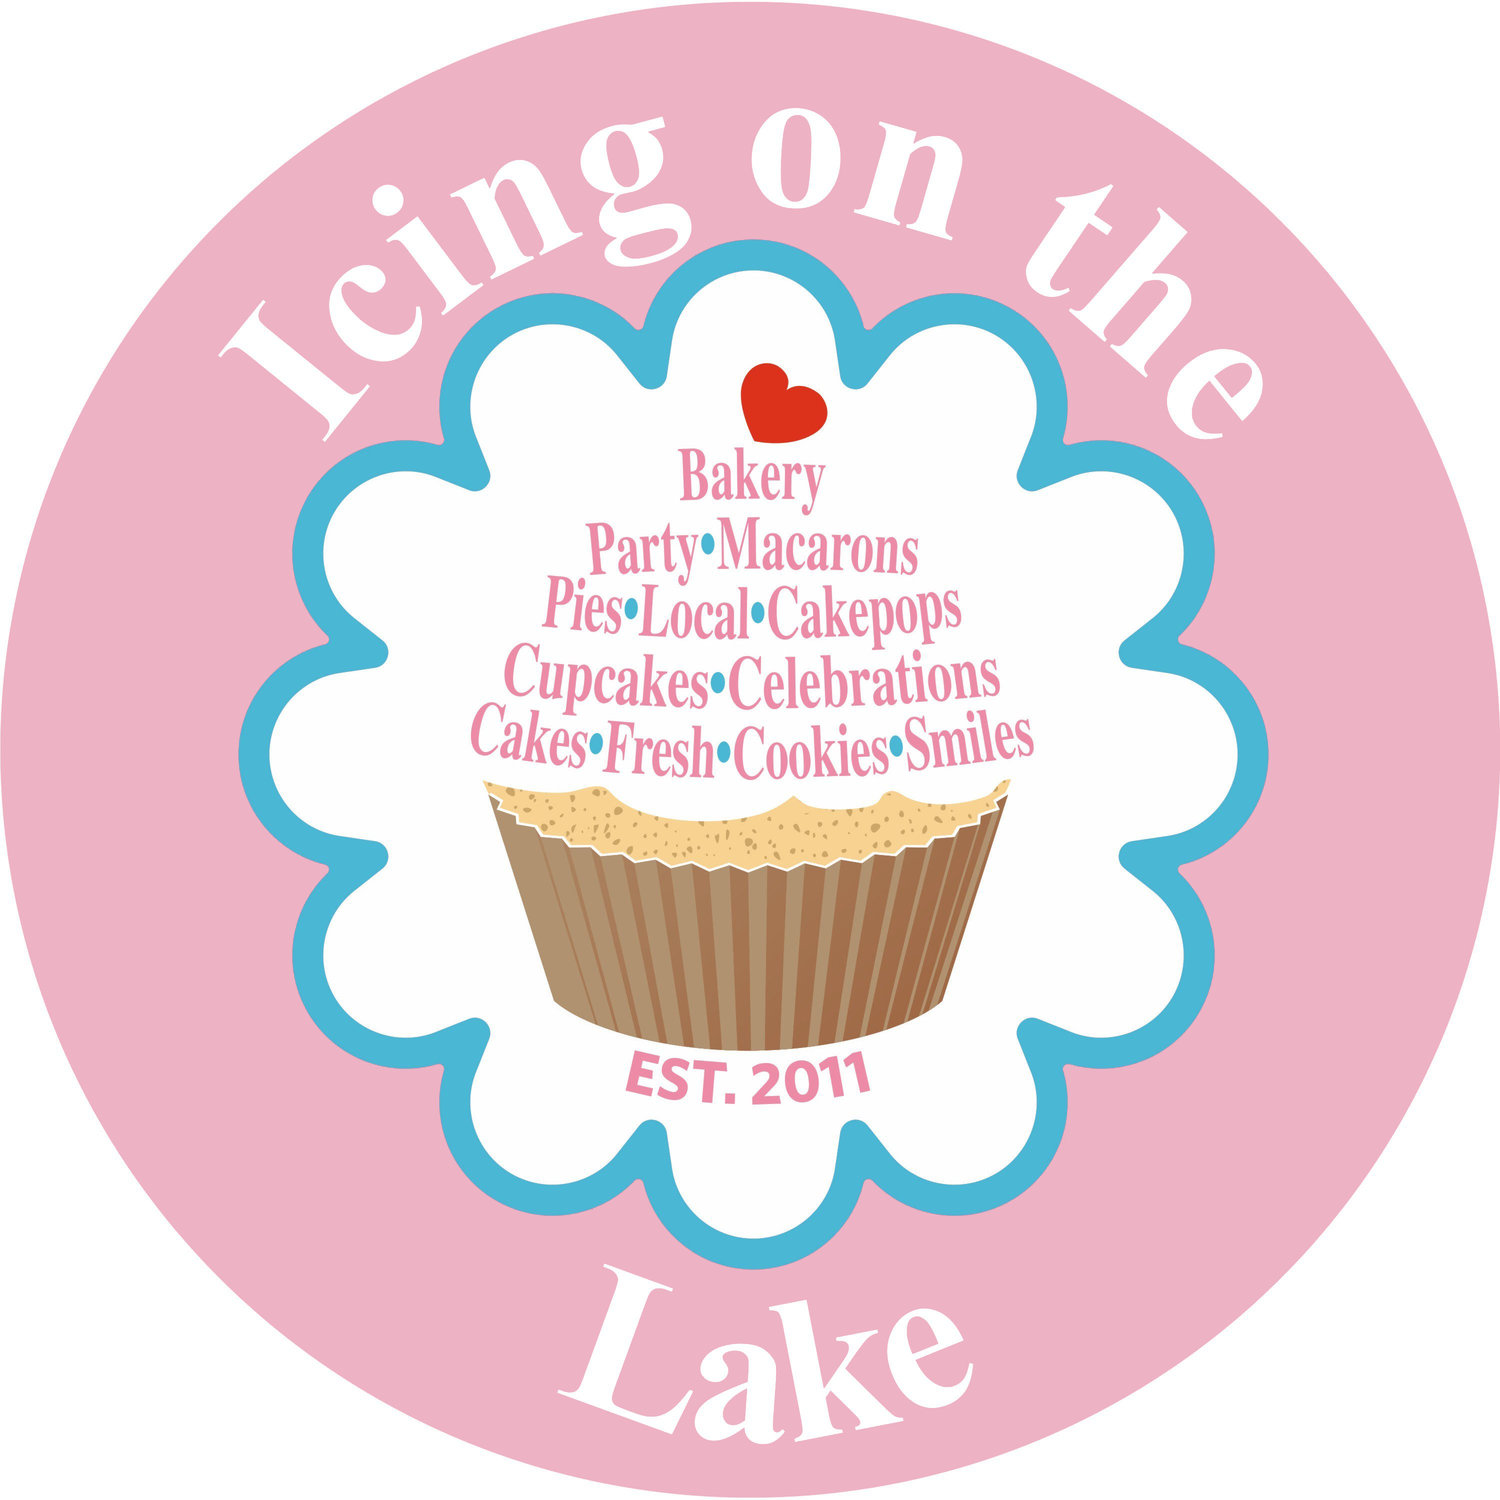 Icing on the Lake